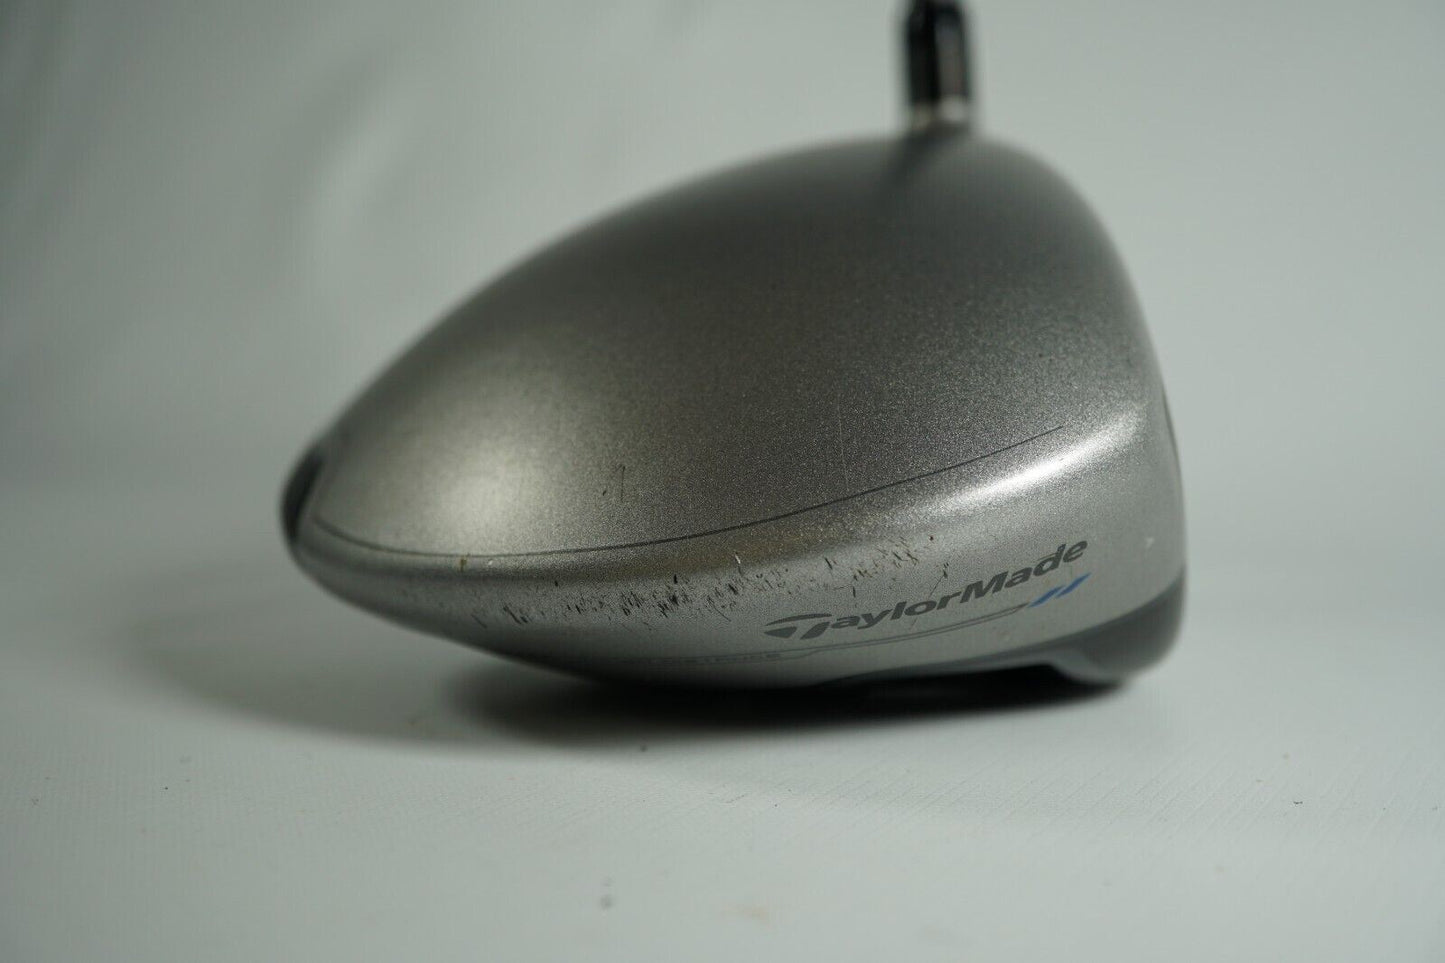 Taylormade SLDR S Driver 10° / Regular Flex Graphite Shaft / With Headcover